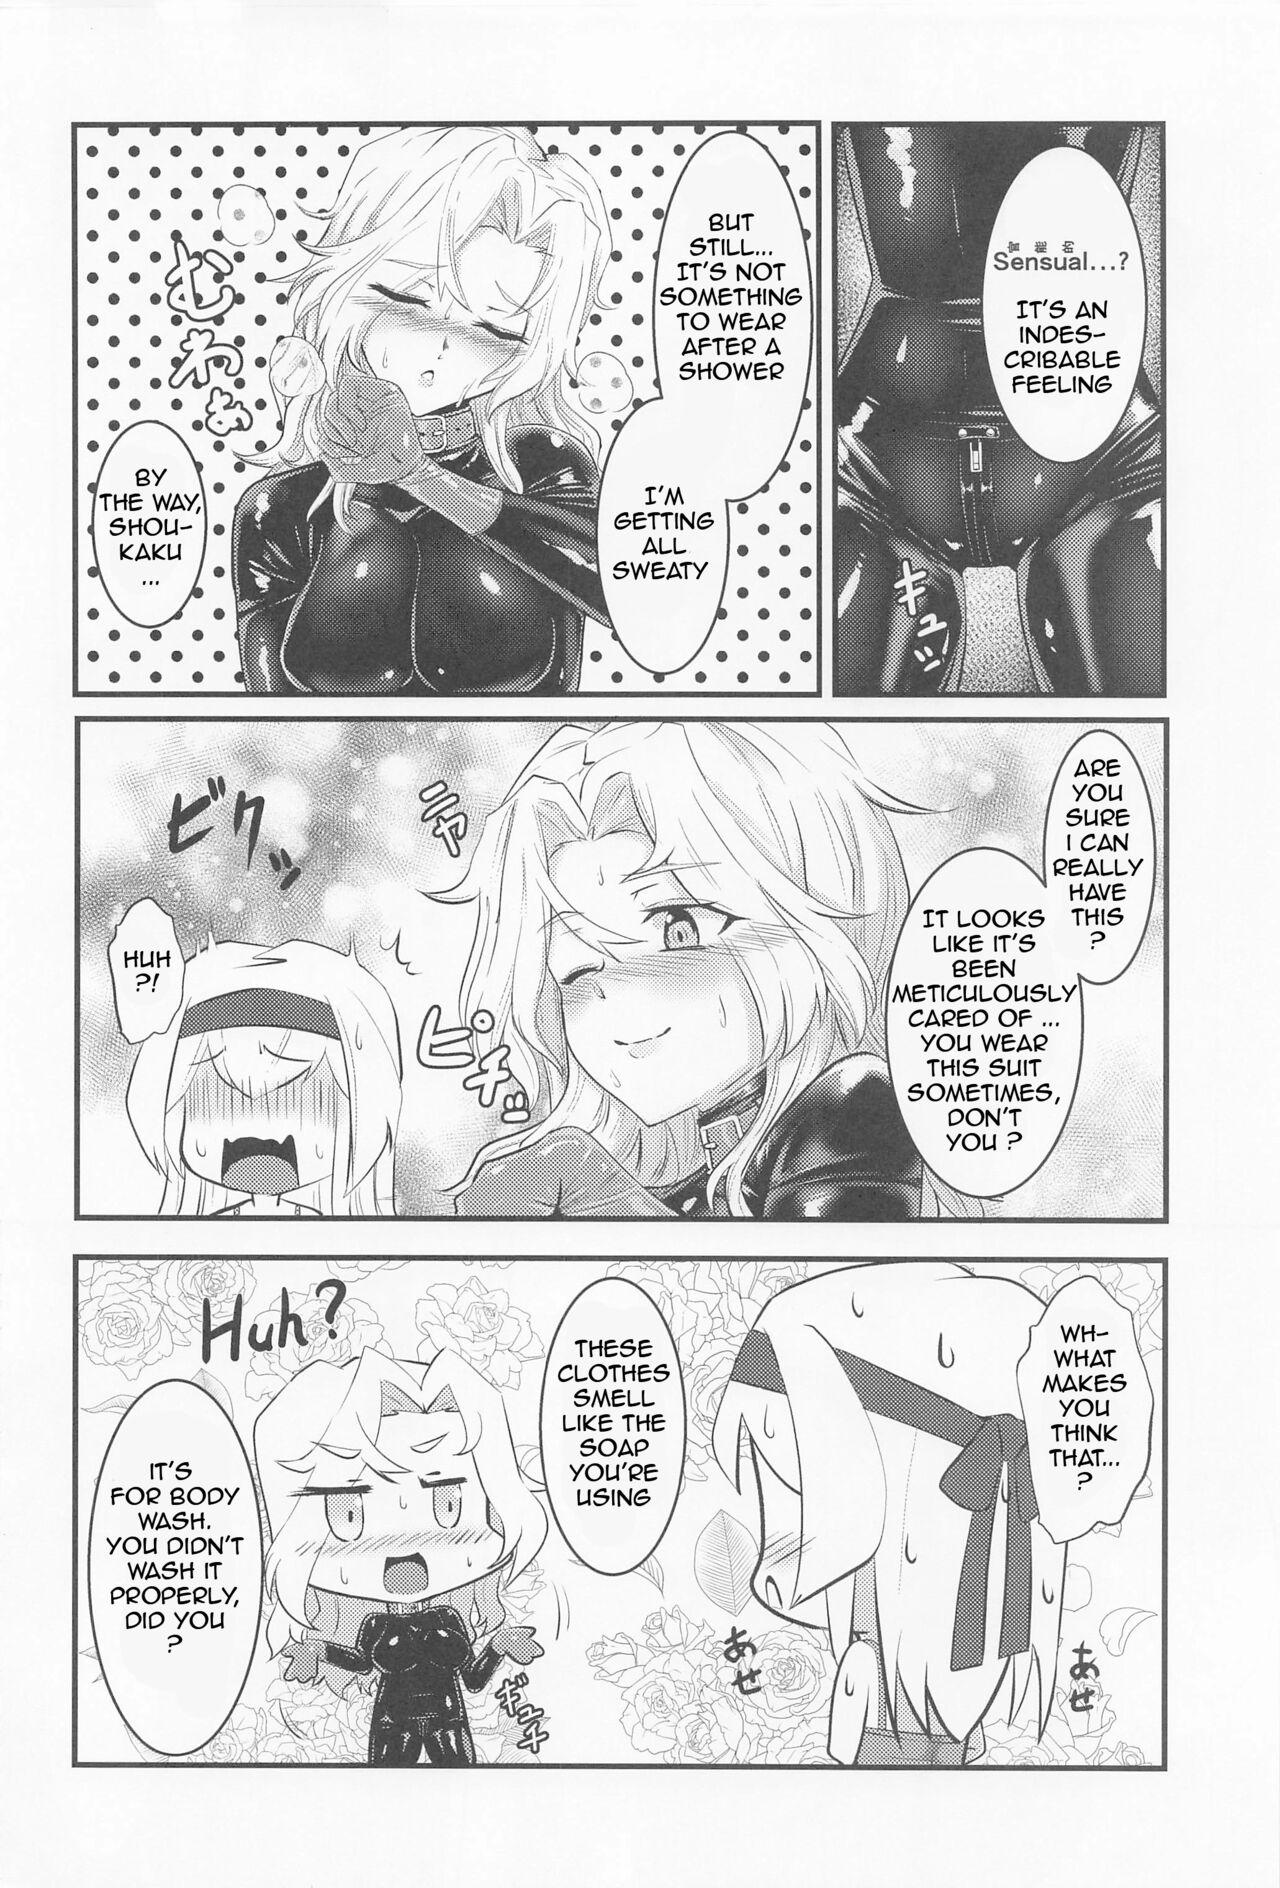 European Porn Covered by Honey... - Kantai collection Backshots - Page 9